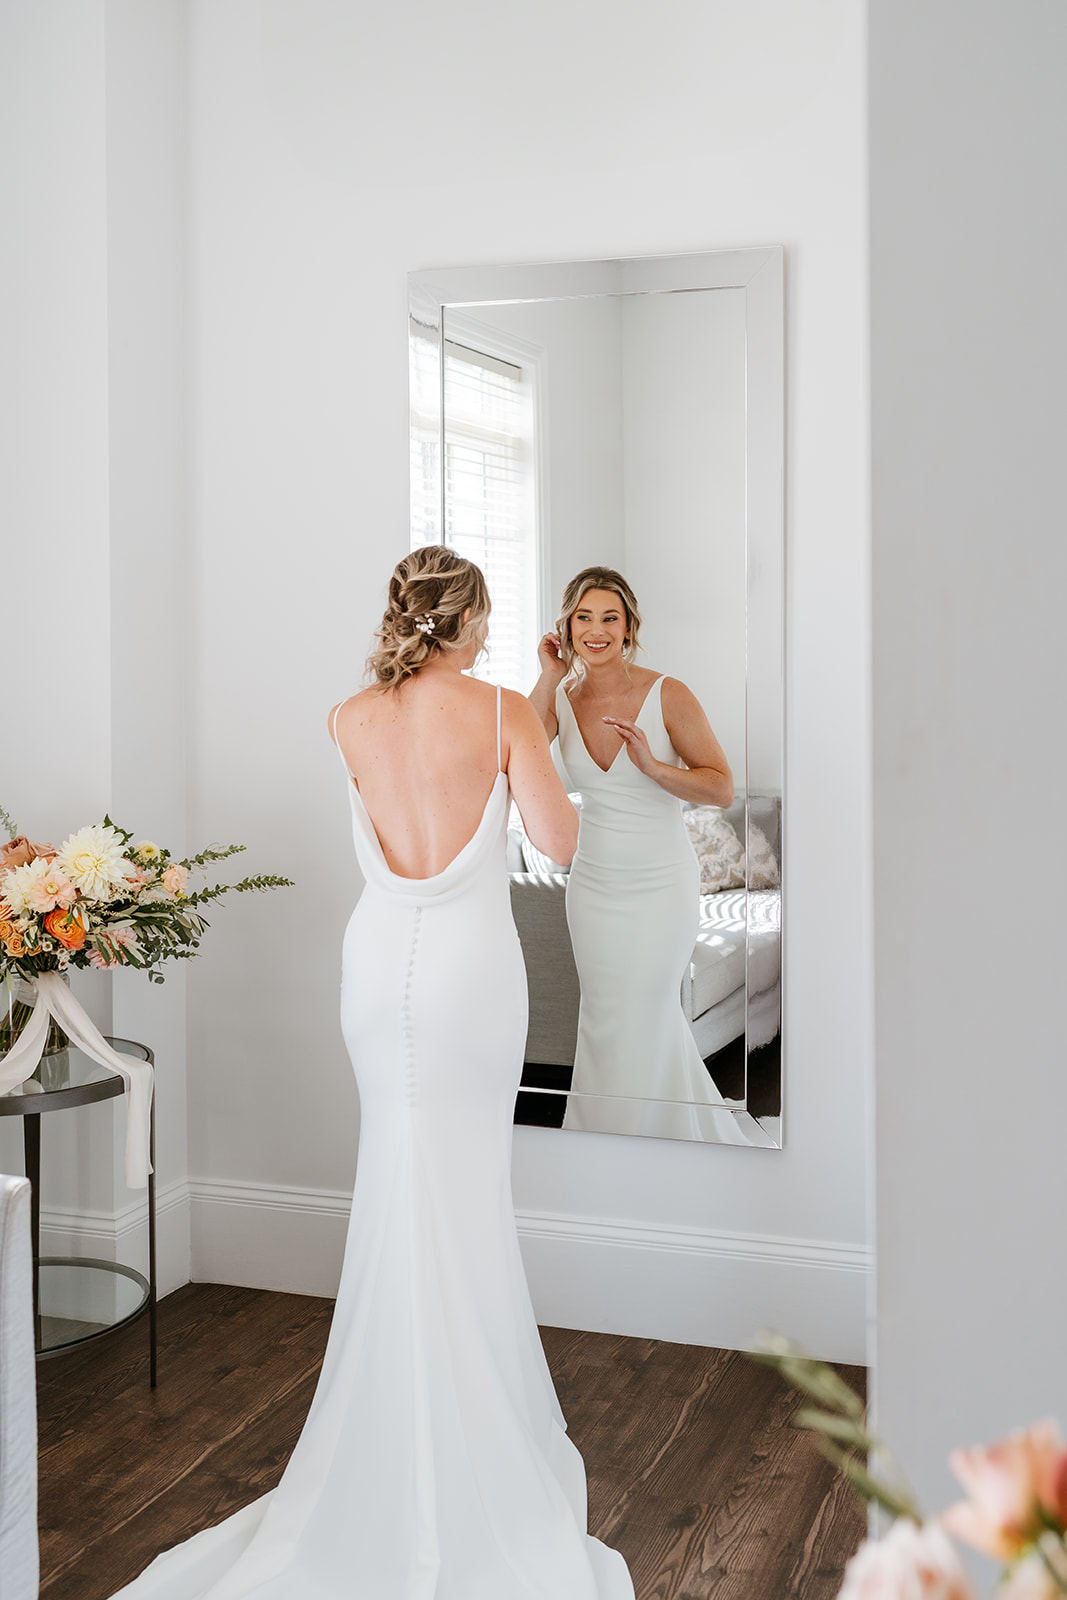 Bride getting ready and looking into the mirror